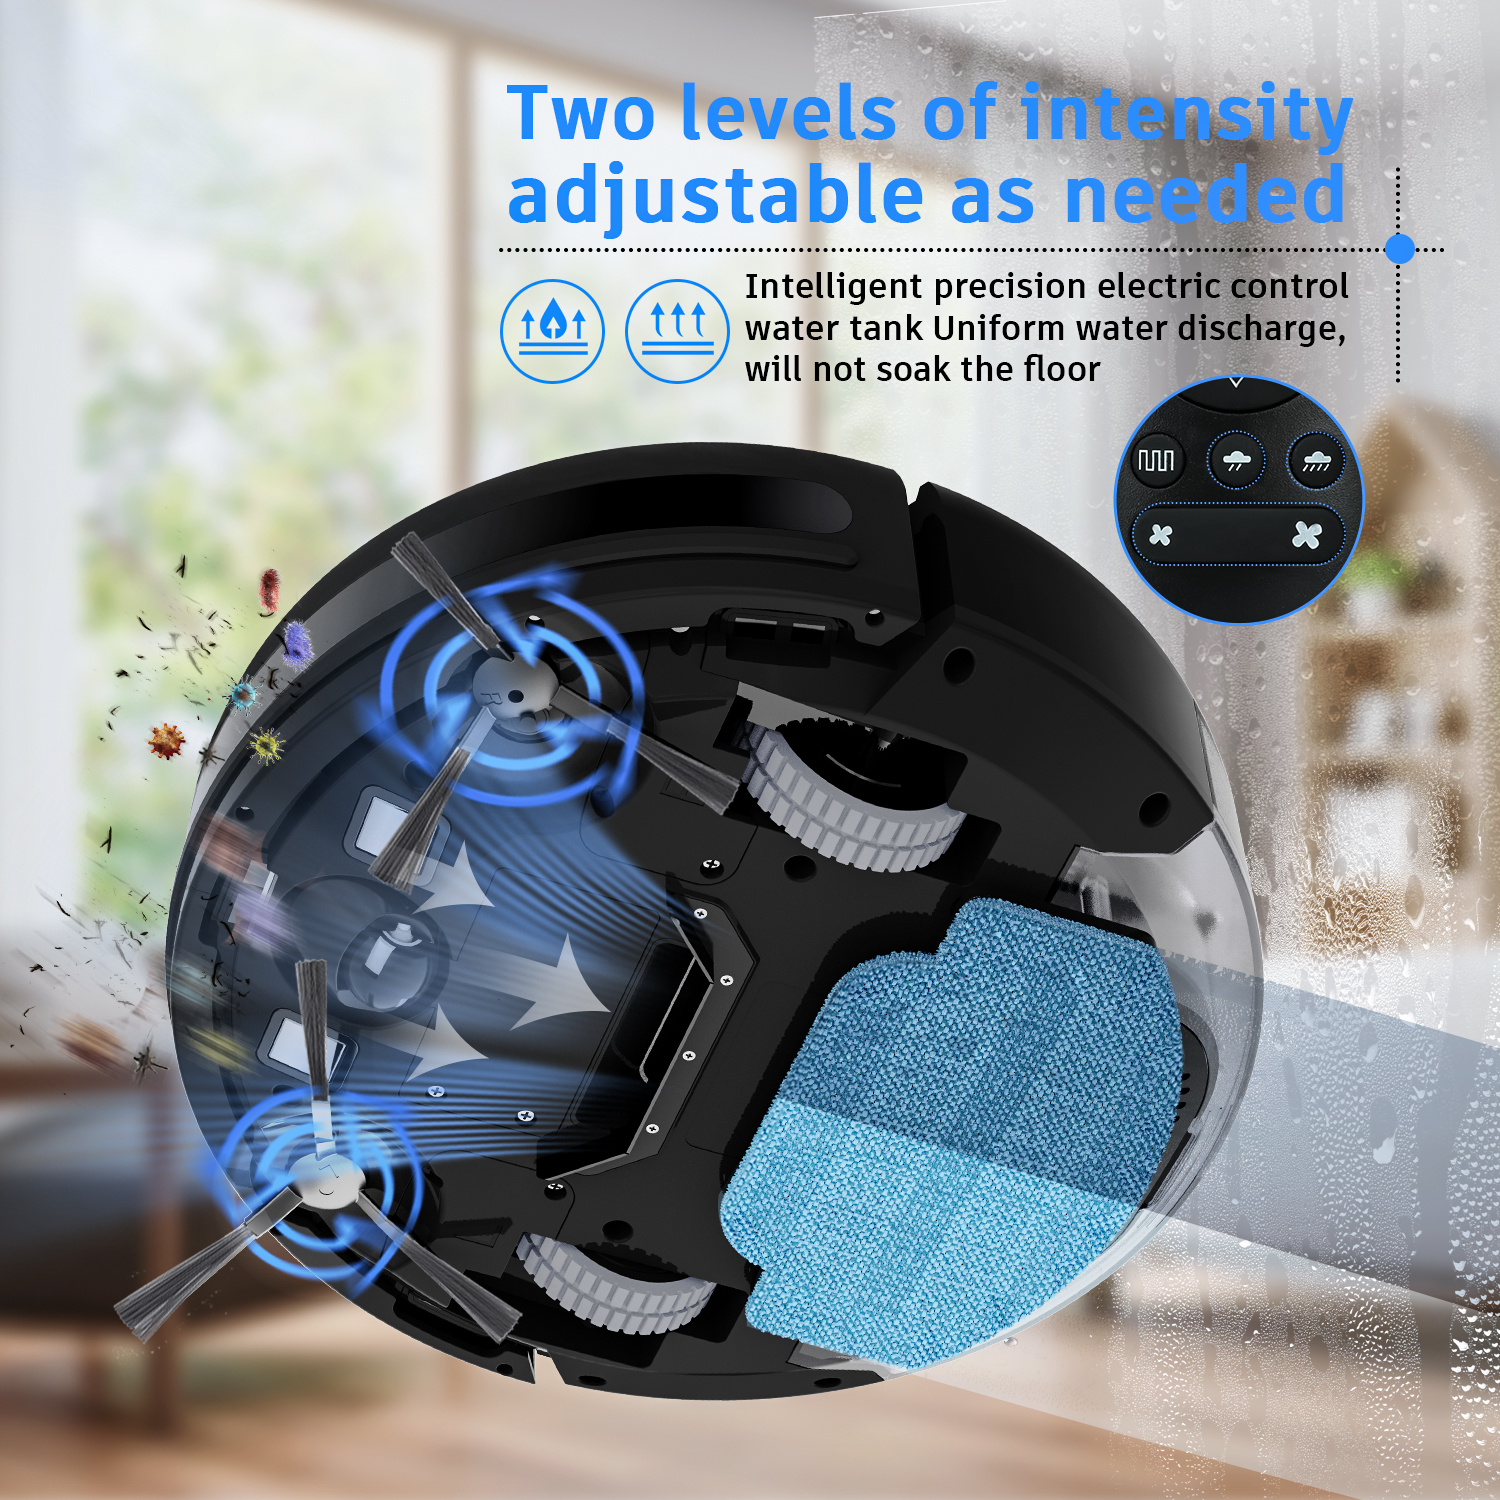 ONSON Robot Vacuum Cleaner, 2 in 1 Robot Vacuum and Mop Combo, With WIFI Connection For Pet Hair, Hard Floor - image 3 of 9